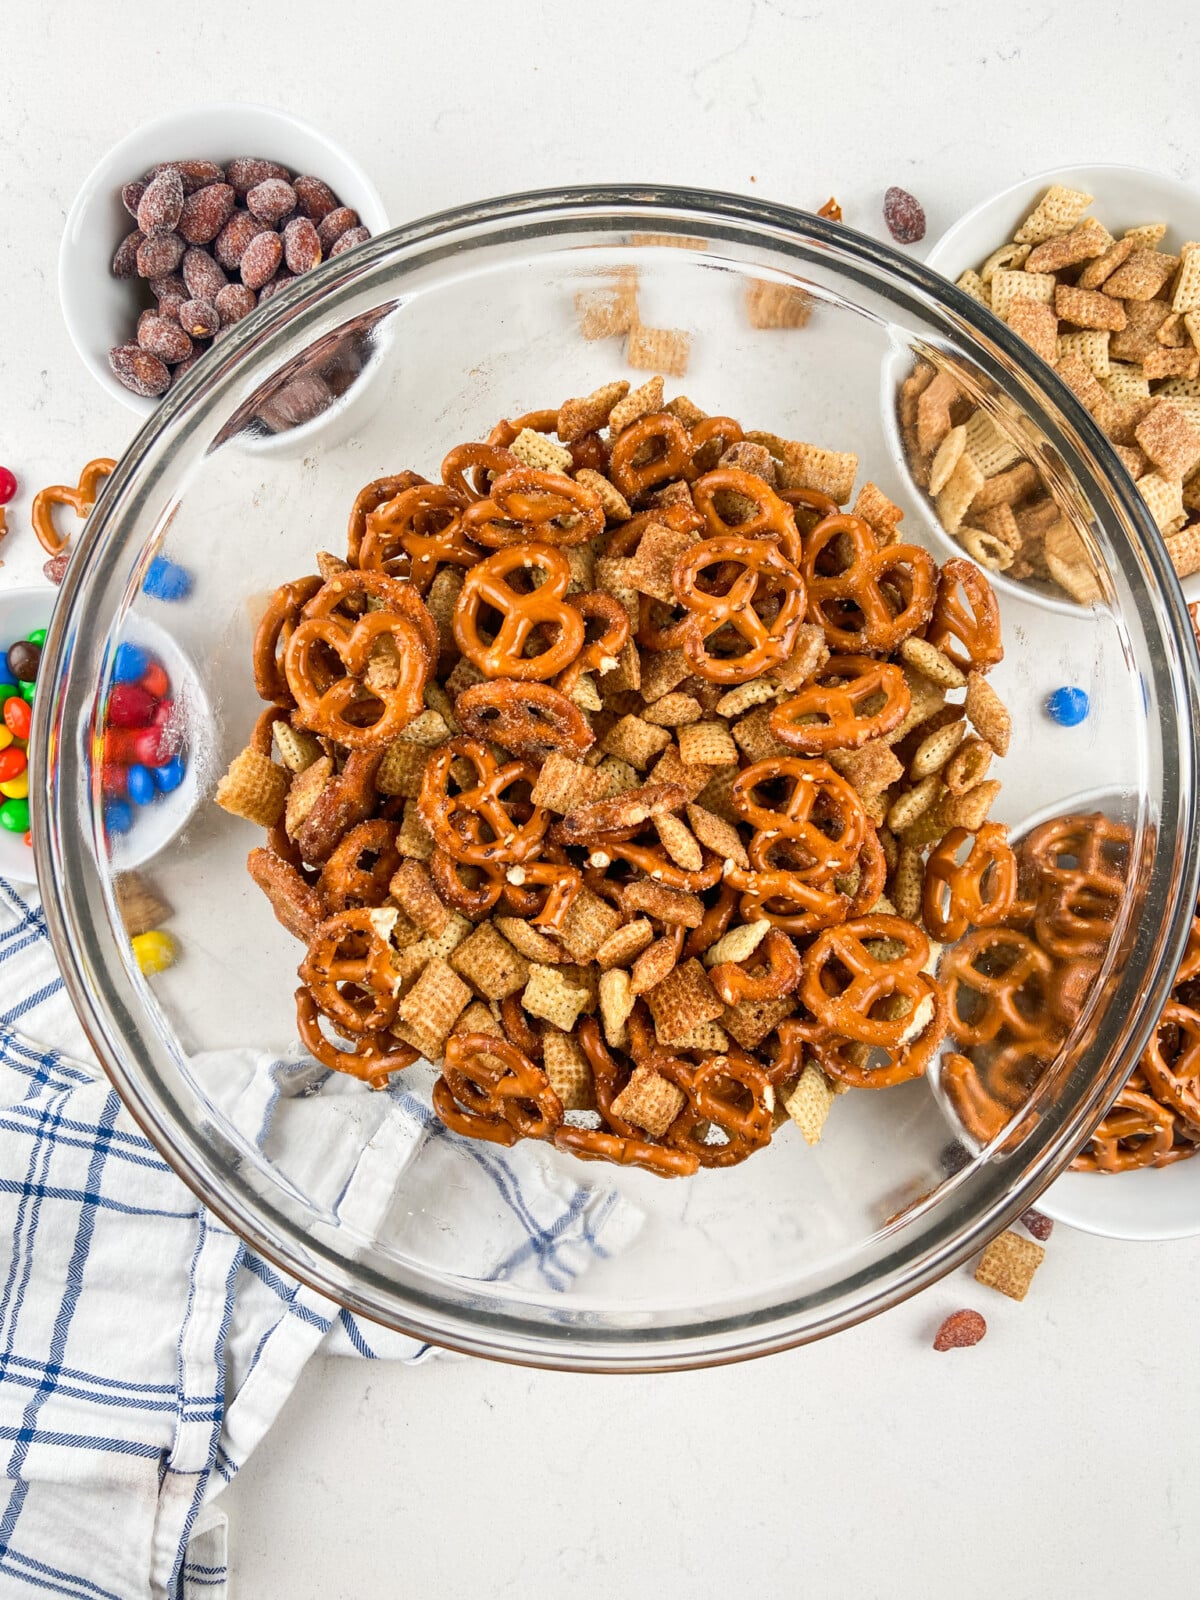 bowl of Chex, pretzels and almonds.